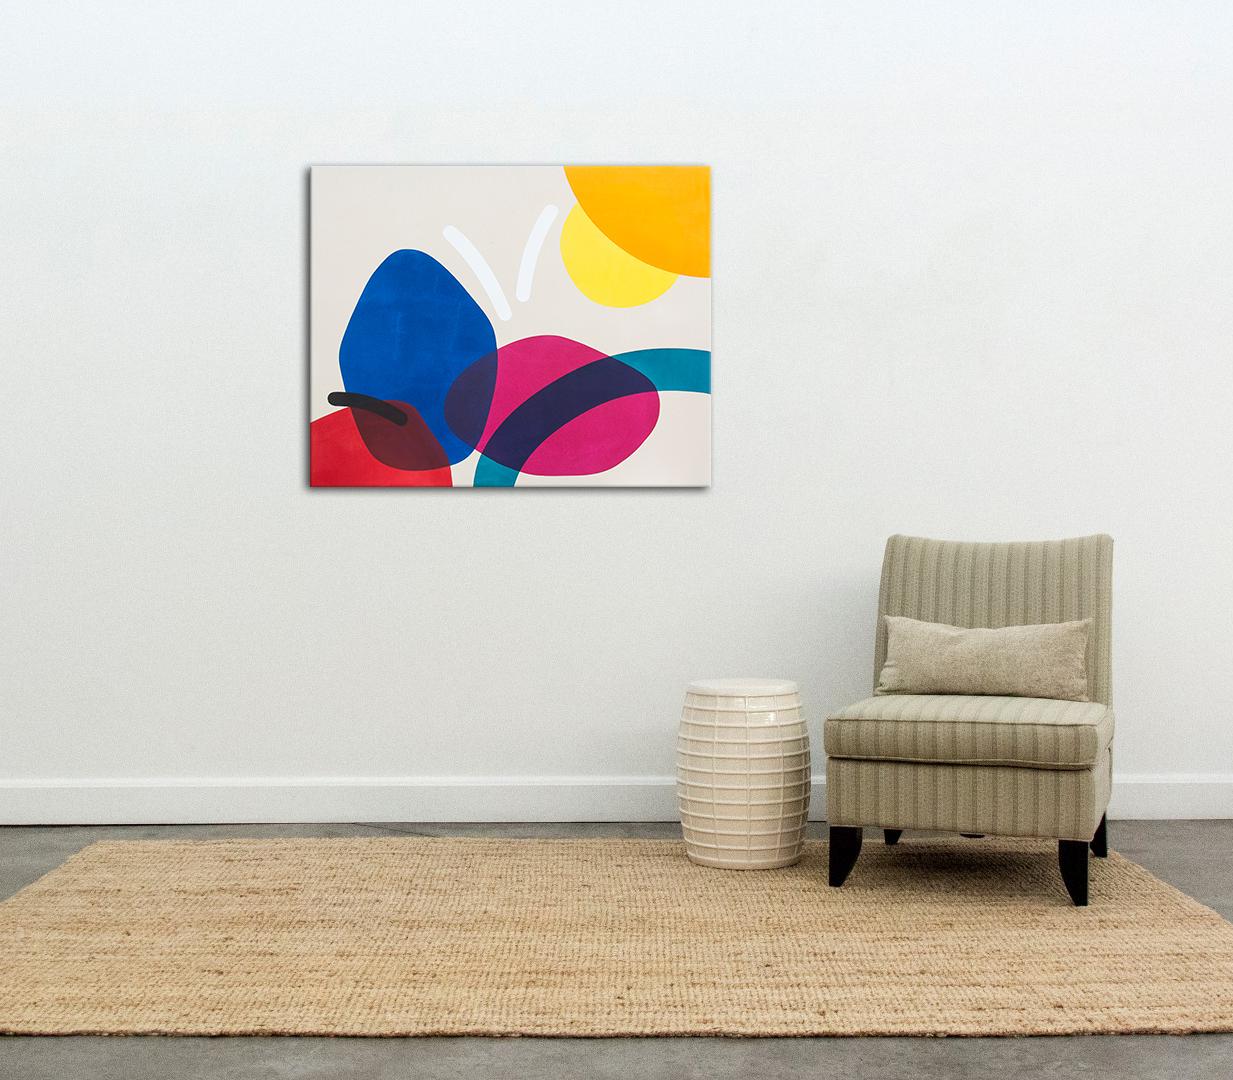 2 Yellow Suns with Red and Blue - Circular, oblong, and arched forms - Beige Abstract Painting by Aron Hill